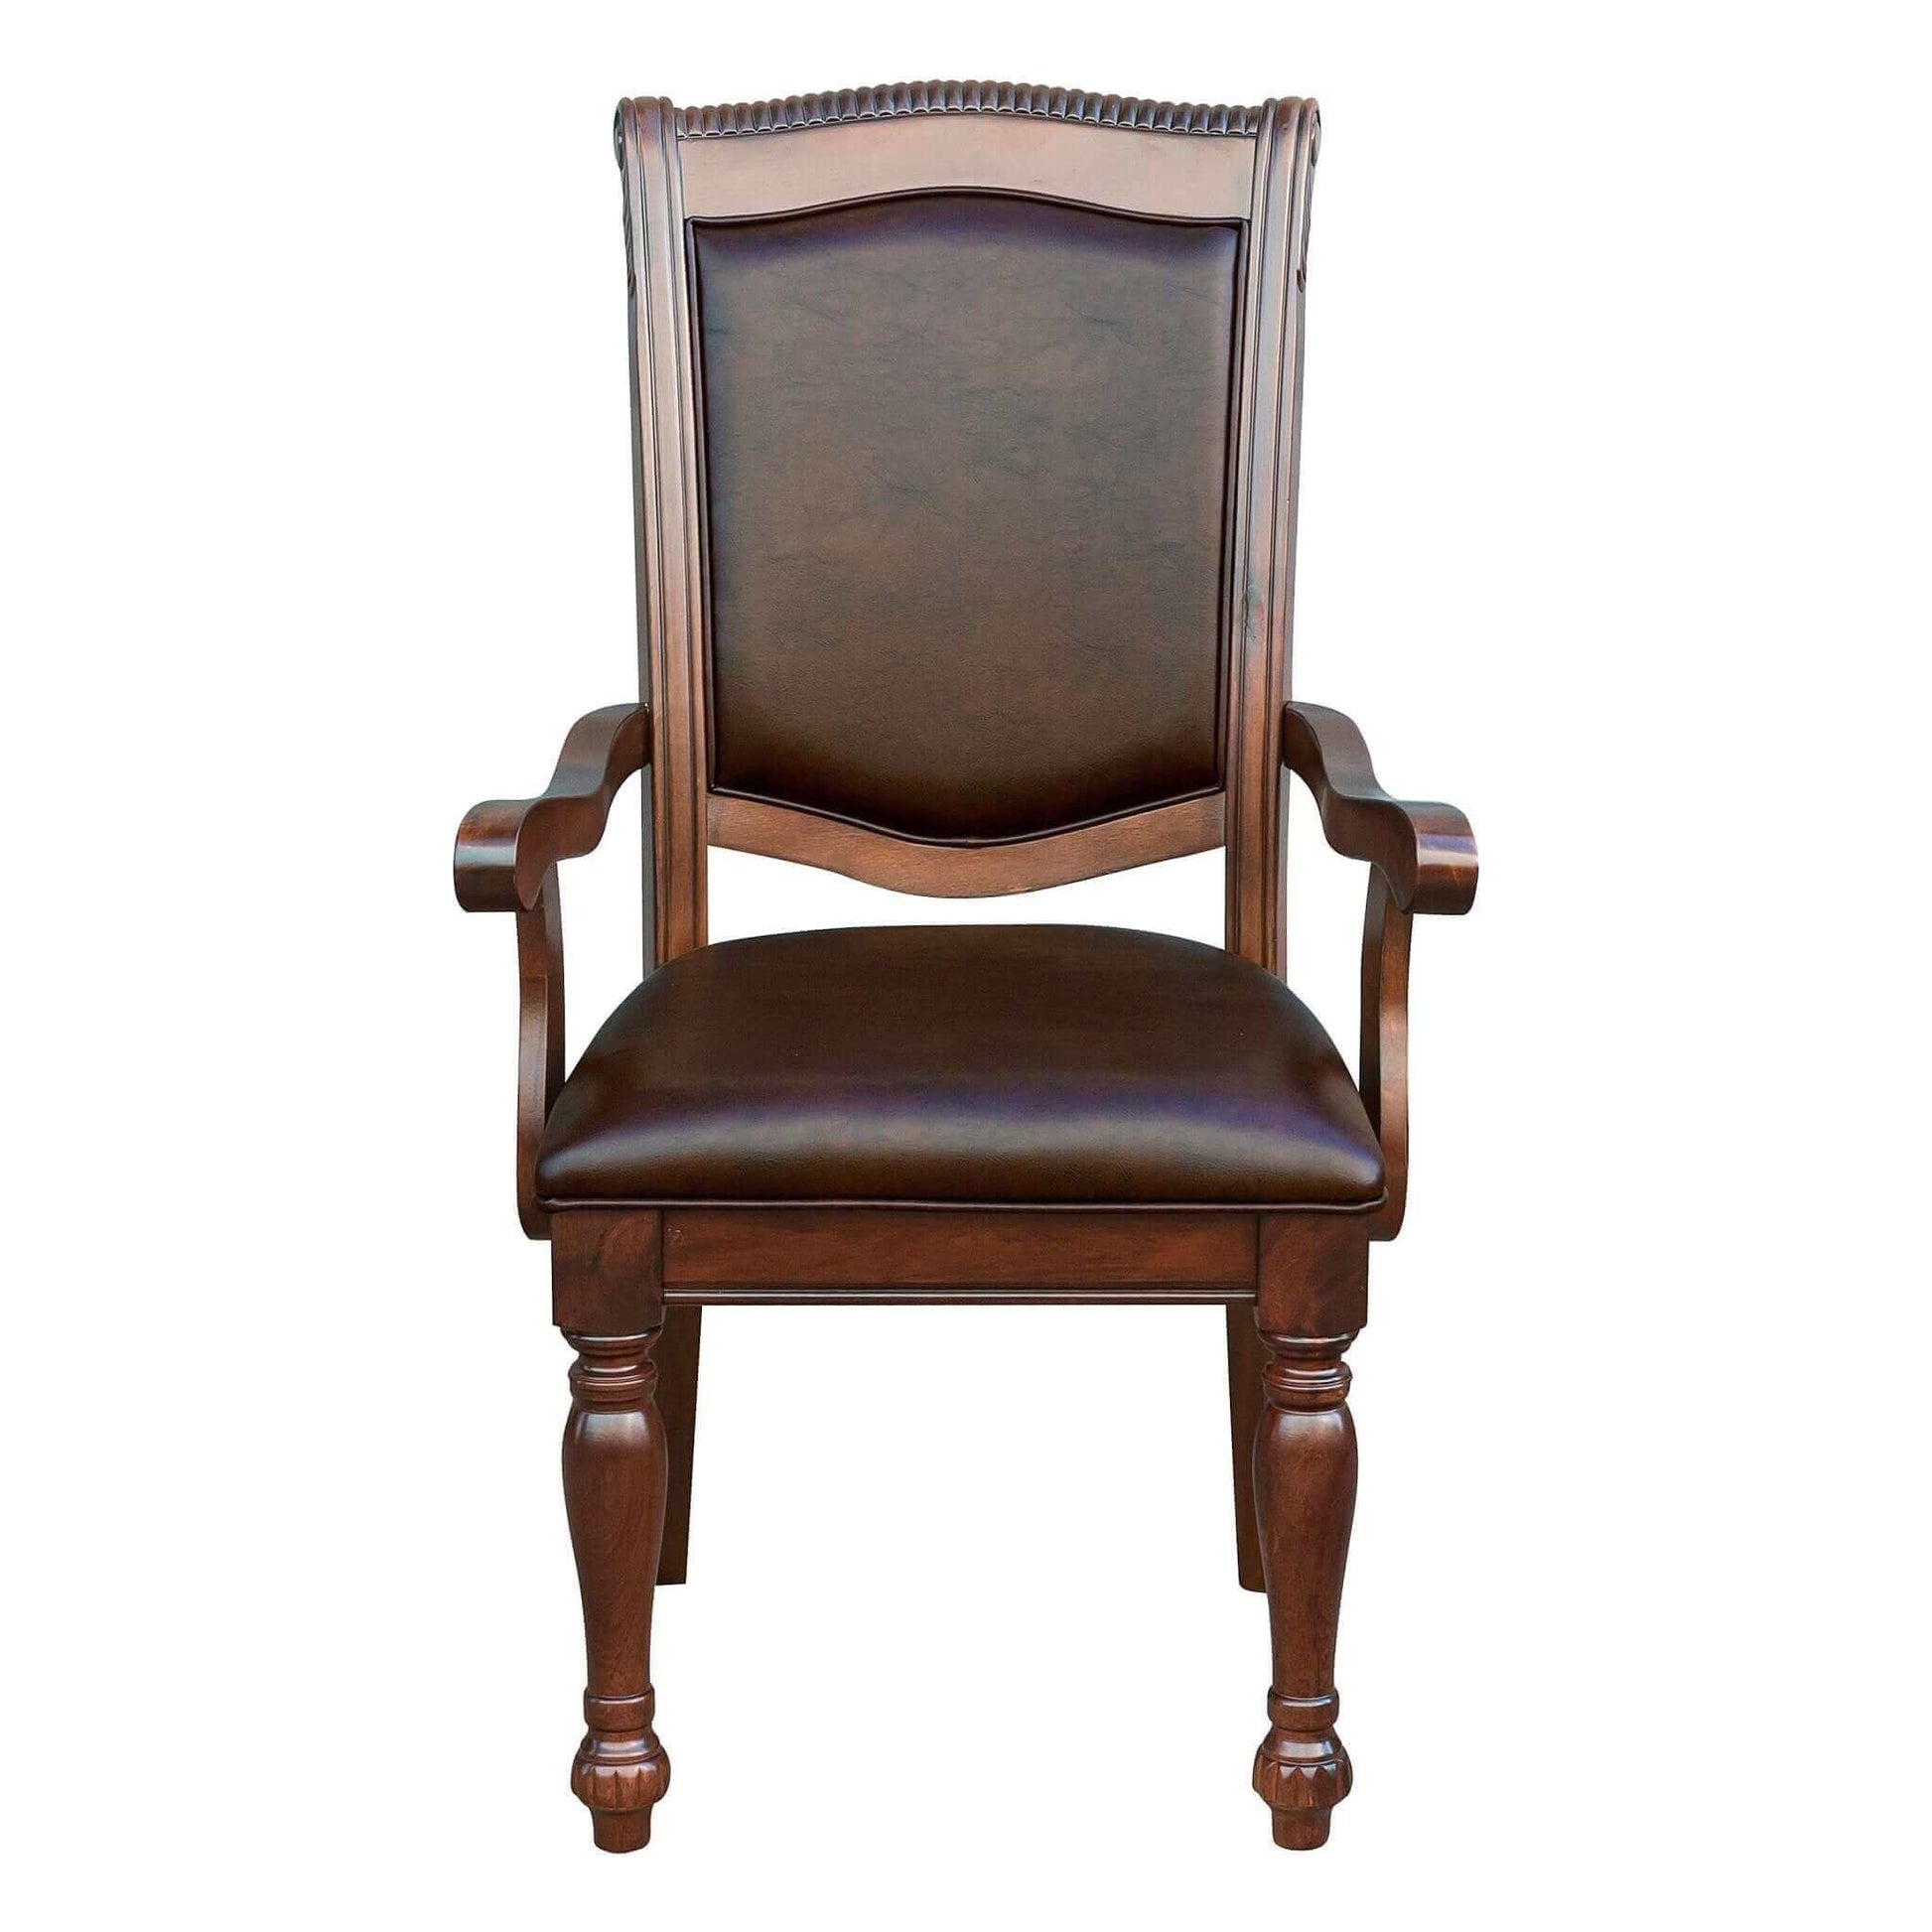 Traditional brown cherry finish armchair with upholstered seat and curved armrests.